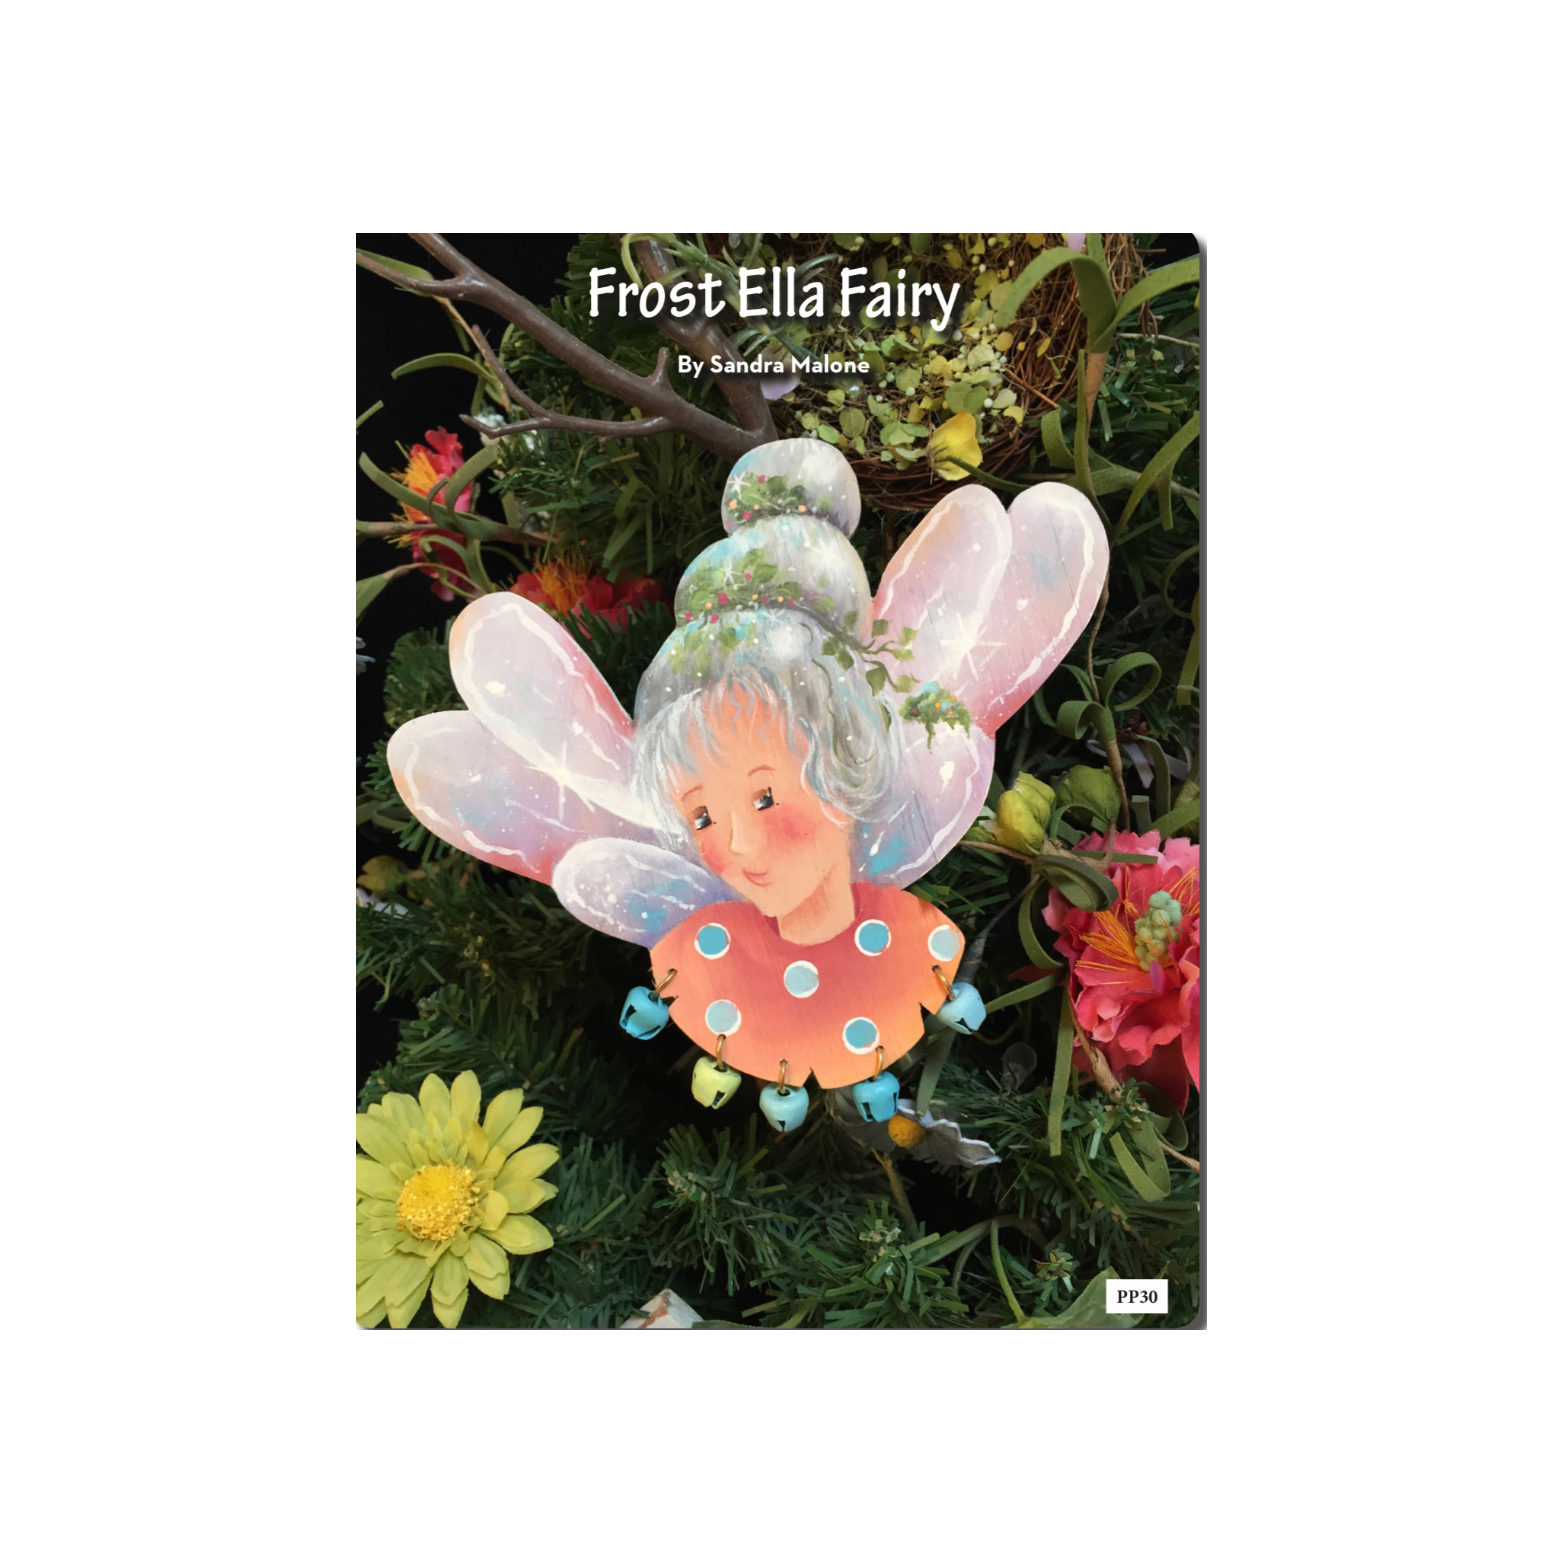 Frost ella Fairy by Sandra Malone Out of the Wood